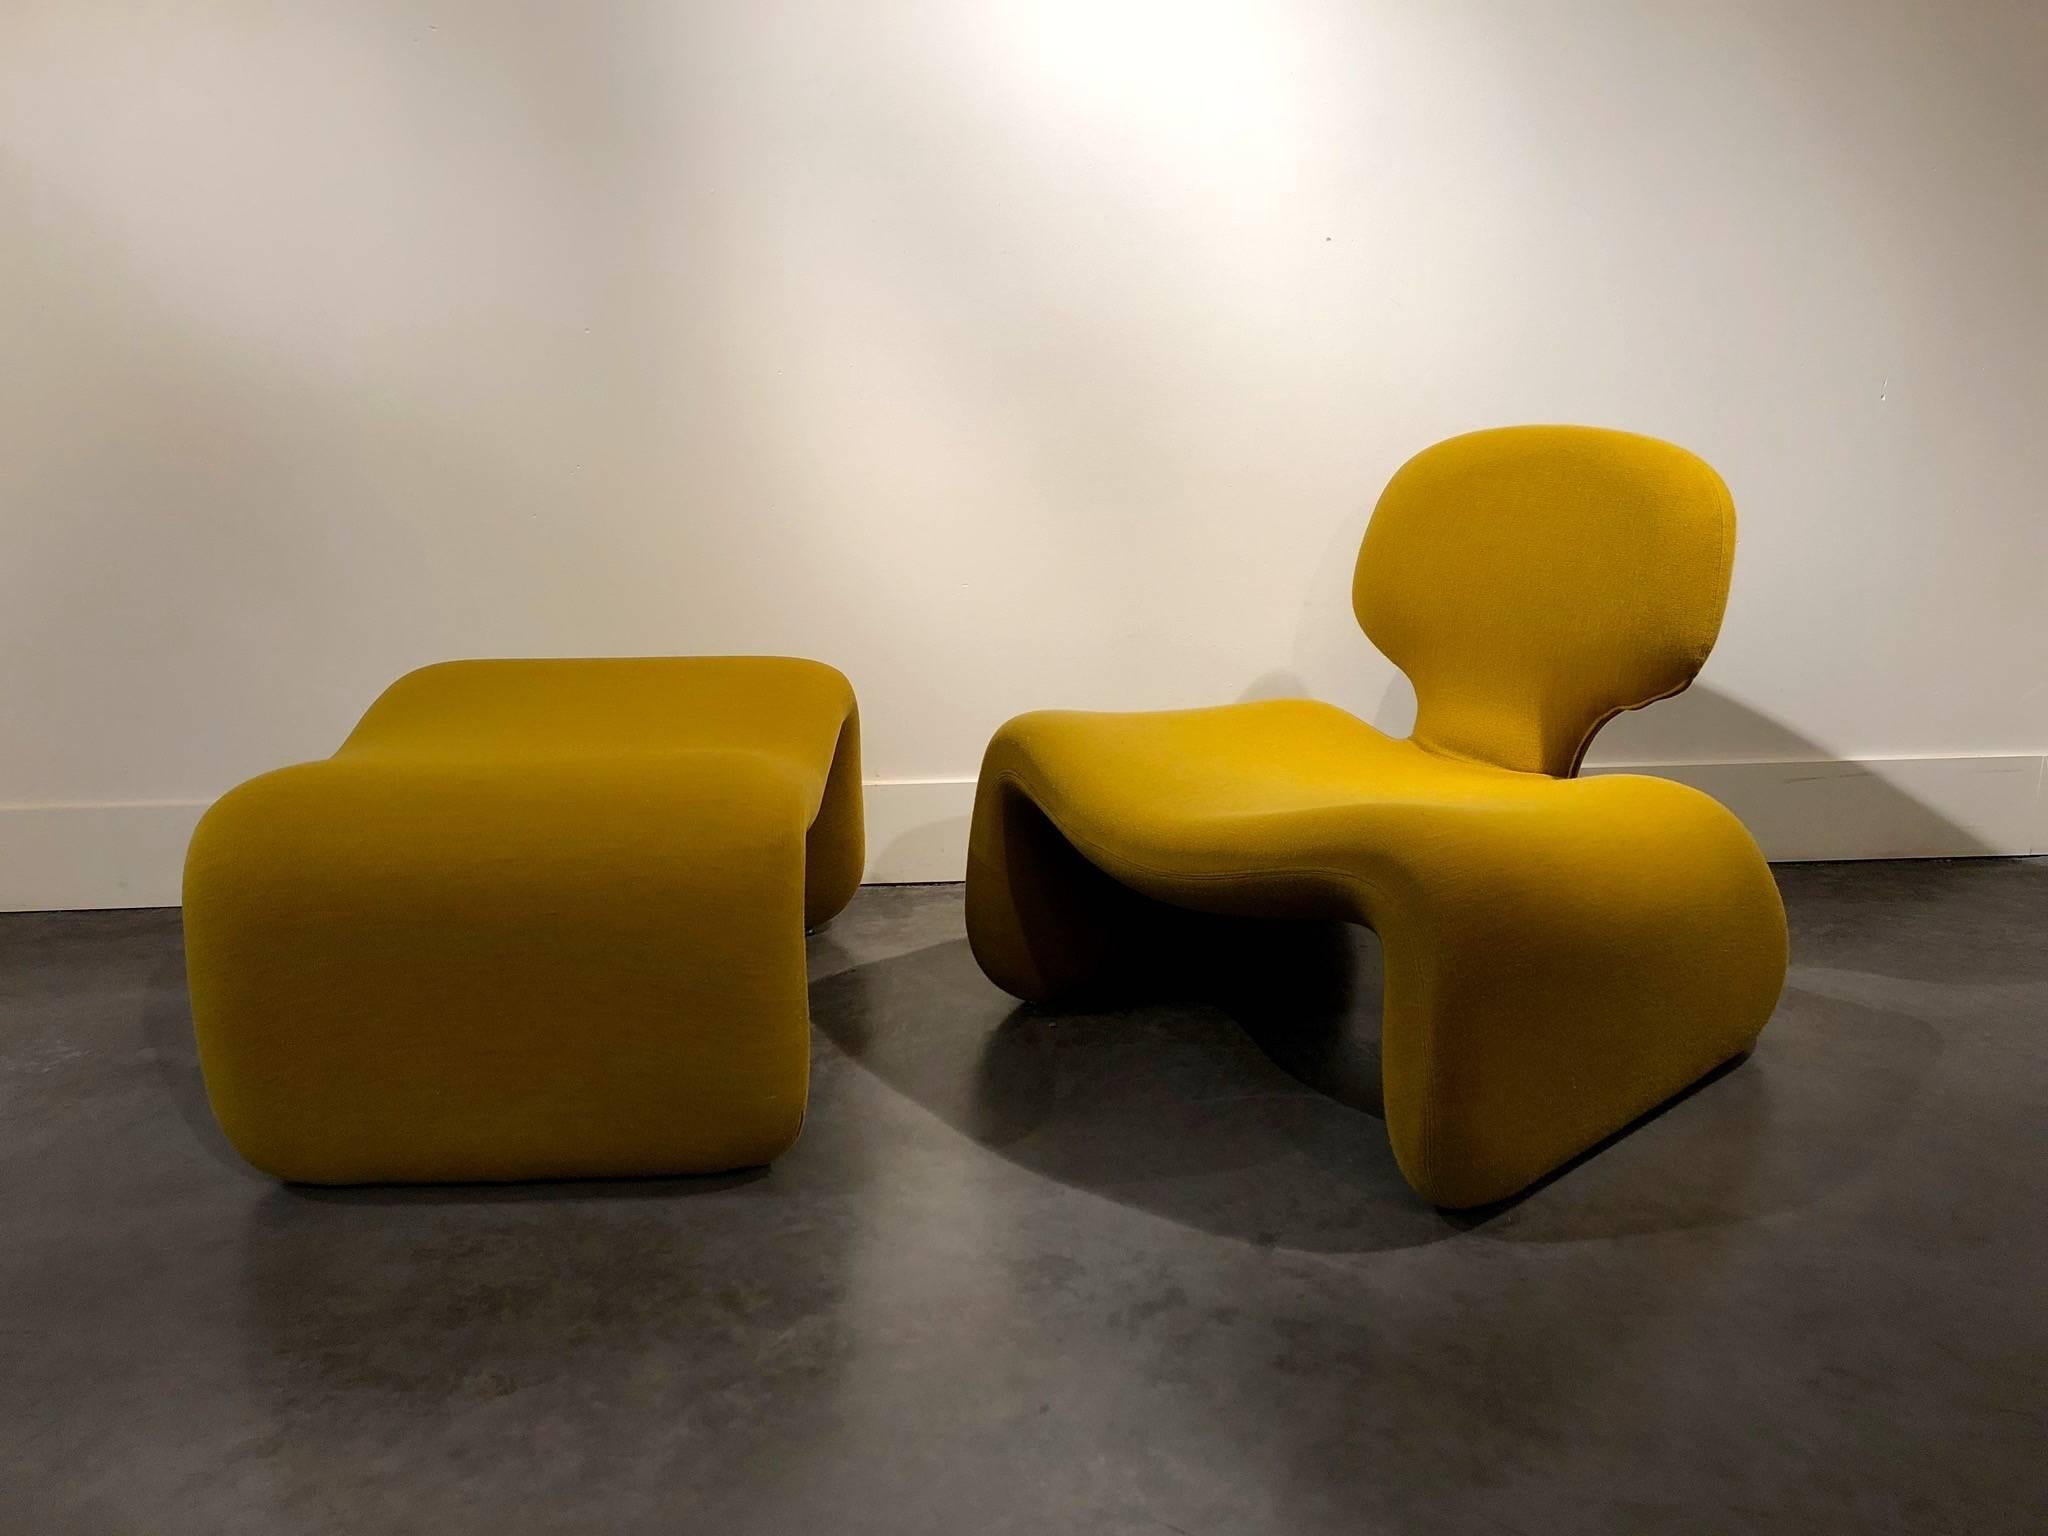 Completely original Djinn chair and ottoman by Olivier Mourgue.
Fresh color and good condition of the fabric.
   